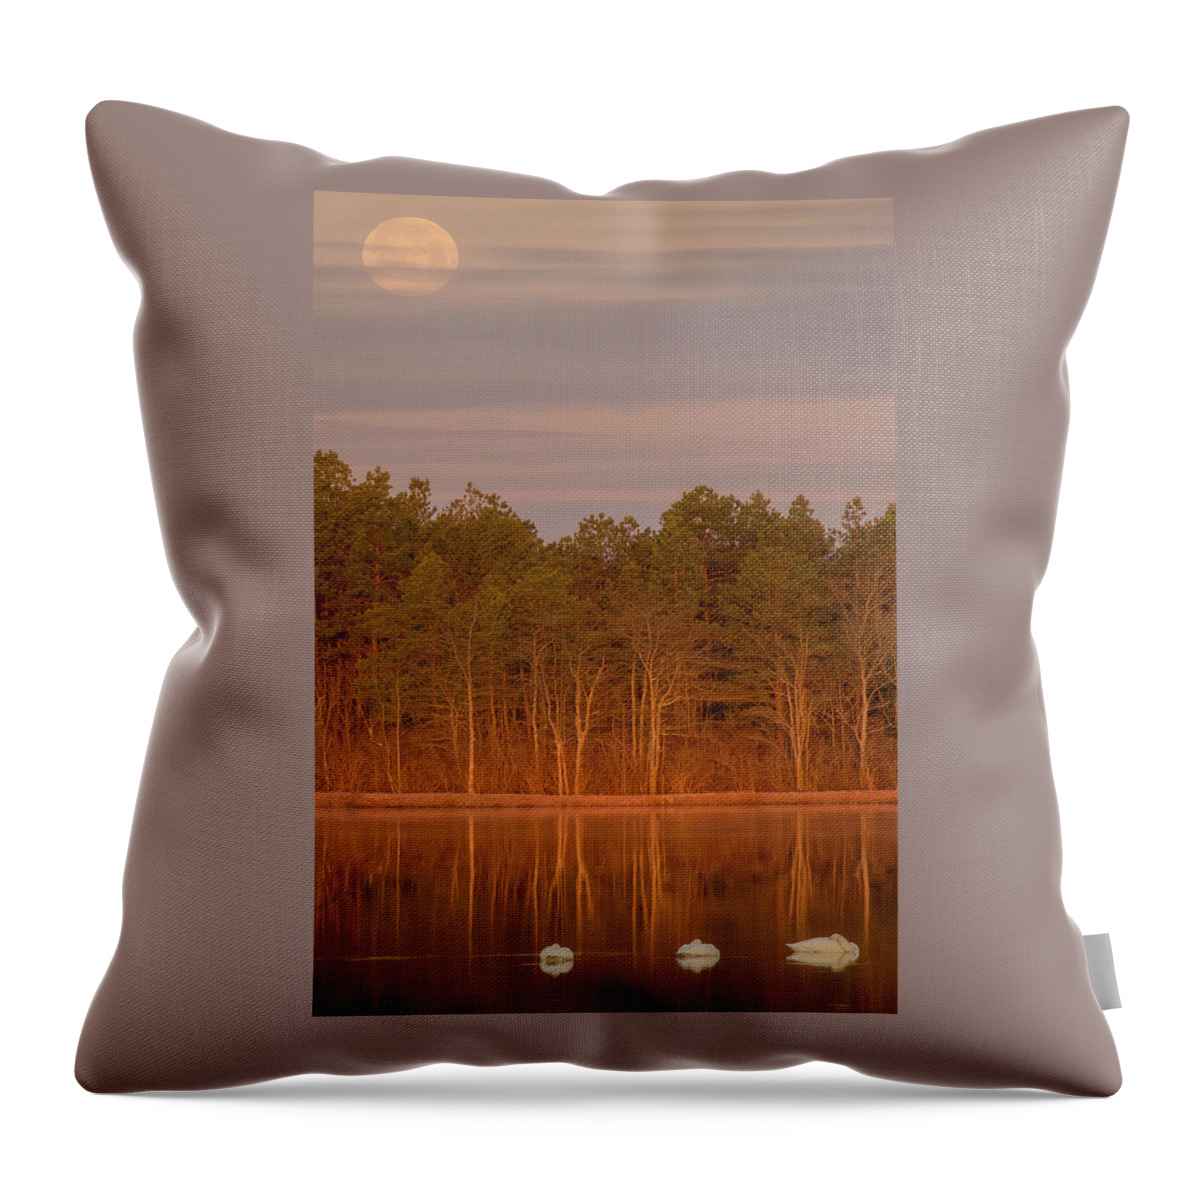 Tundra Swans Throw Pillow featuring the photograph Tundra Swans Under the Full Snow Moon by Beth Venner